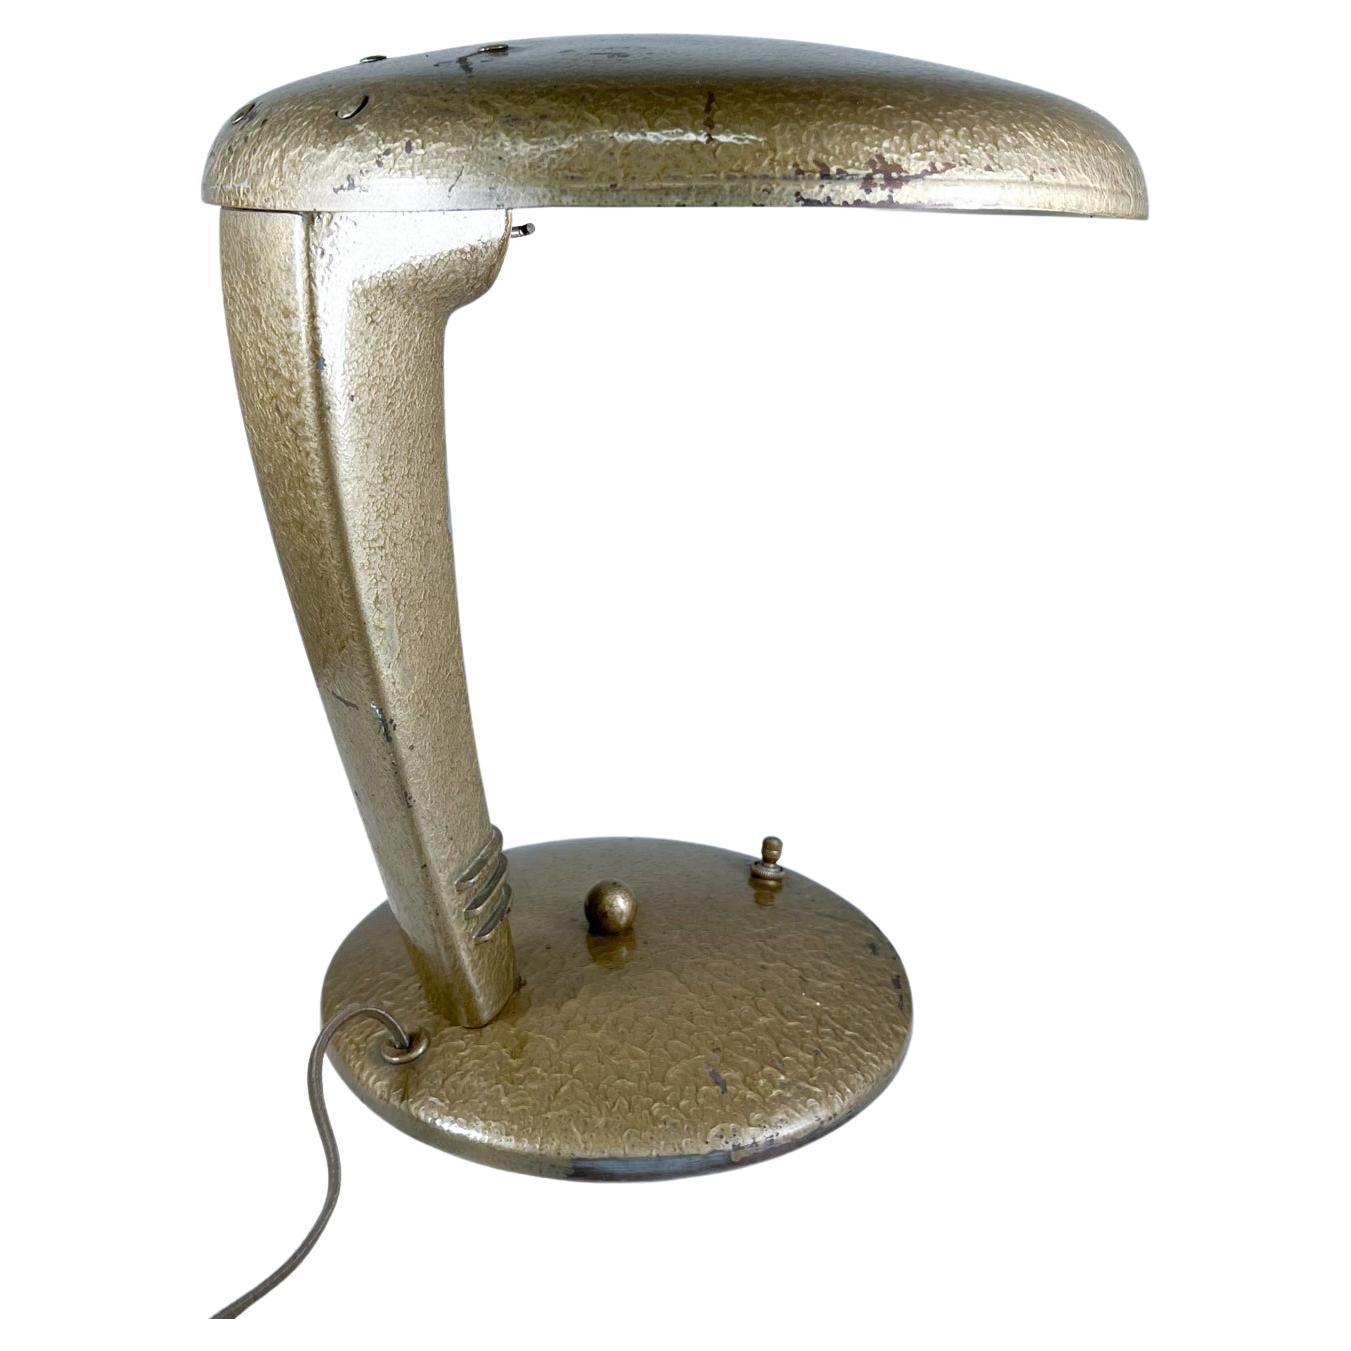 1947 Antiqued gold cobra lamp by Jean Otis Reinecke for Faries MFG
Measures: 12 tall x 11.25 deep x 10.75 wide
Robert Fairies MFG- Jean Ottis. Reinecke 1947
Norman Bel Geddes Era
Brass copper metal 
Unrestored original vintage condition.
See